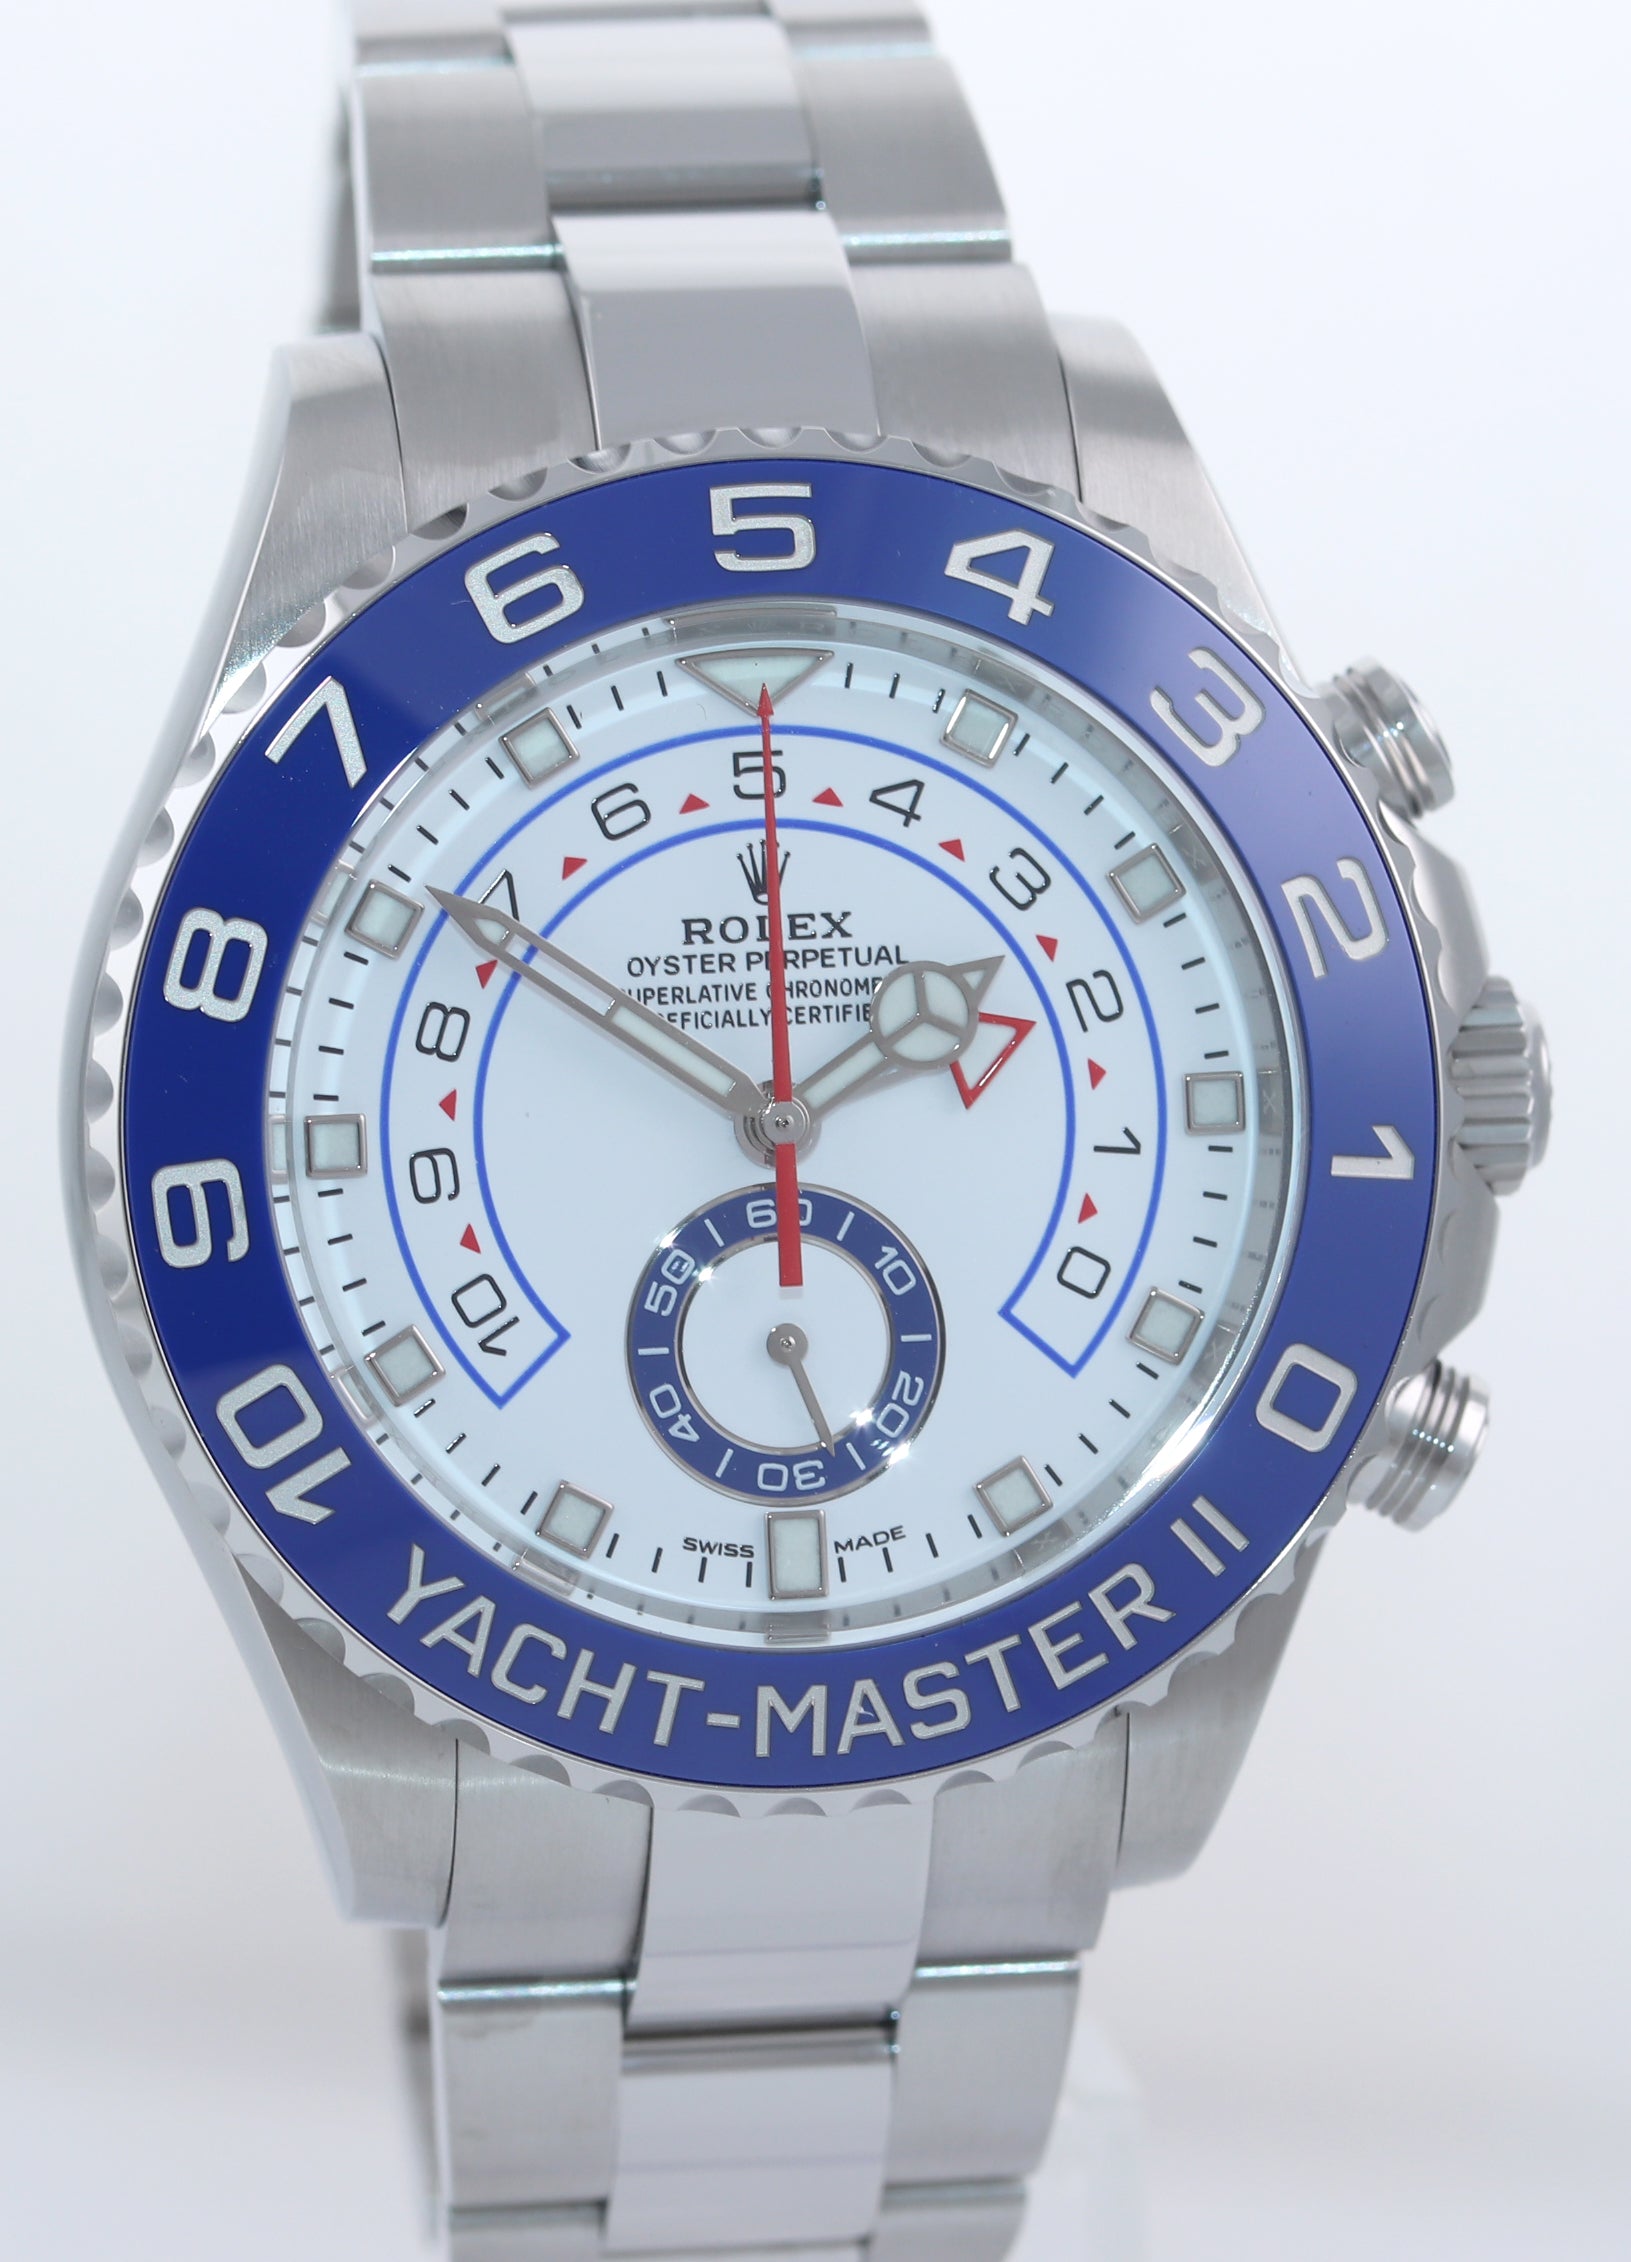 2020 NEW PAPERS Rolex Yacht-Master 2 NEW STYLE HANDS Steel Blue 116680 Watch Box